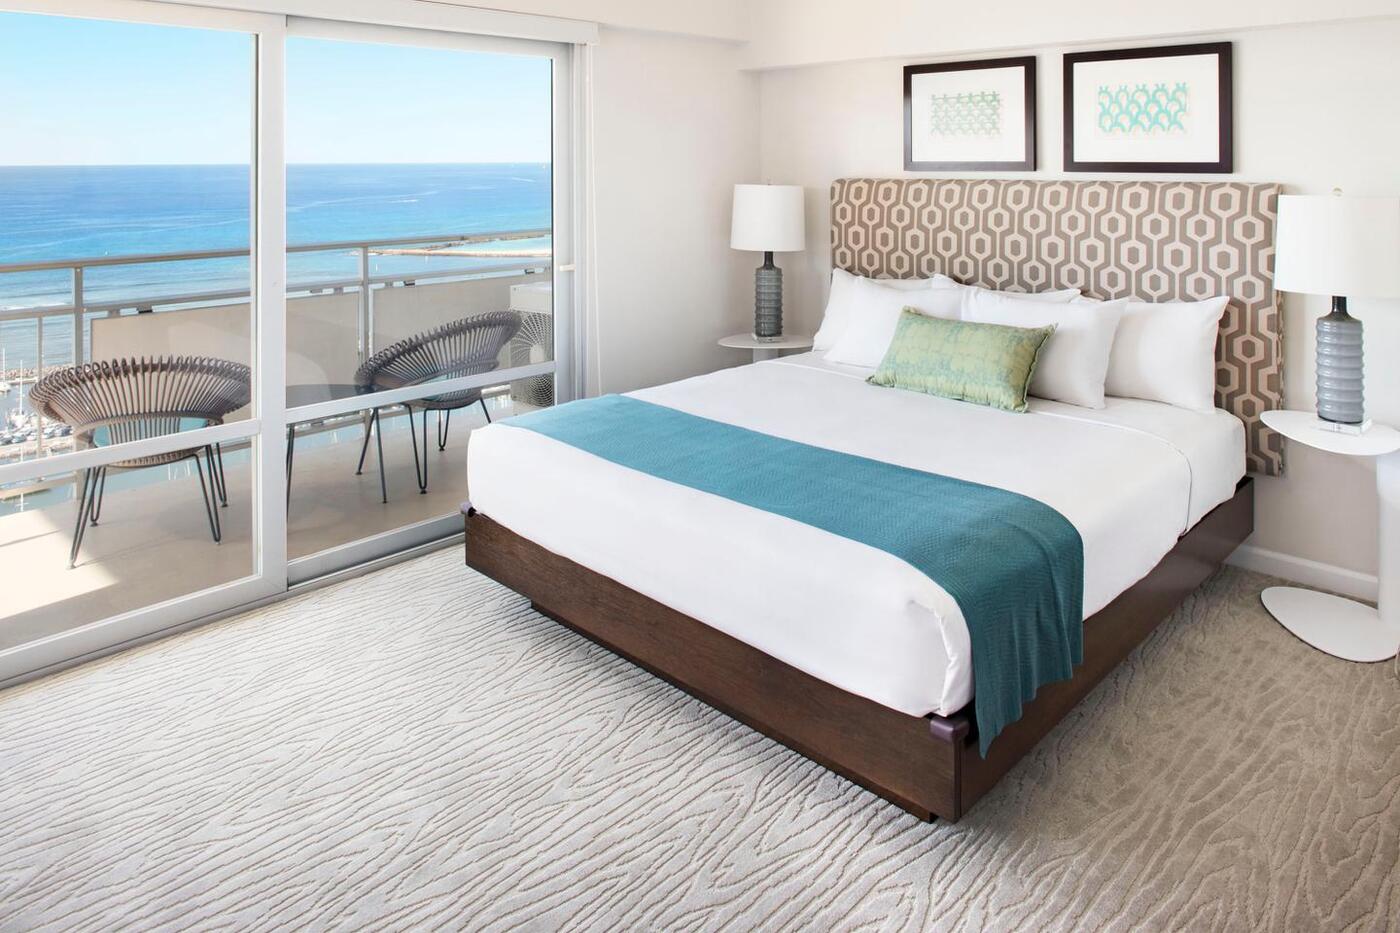 Room with bed, nightstands, lamps, and balcony with ocean views.